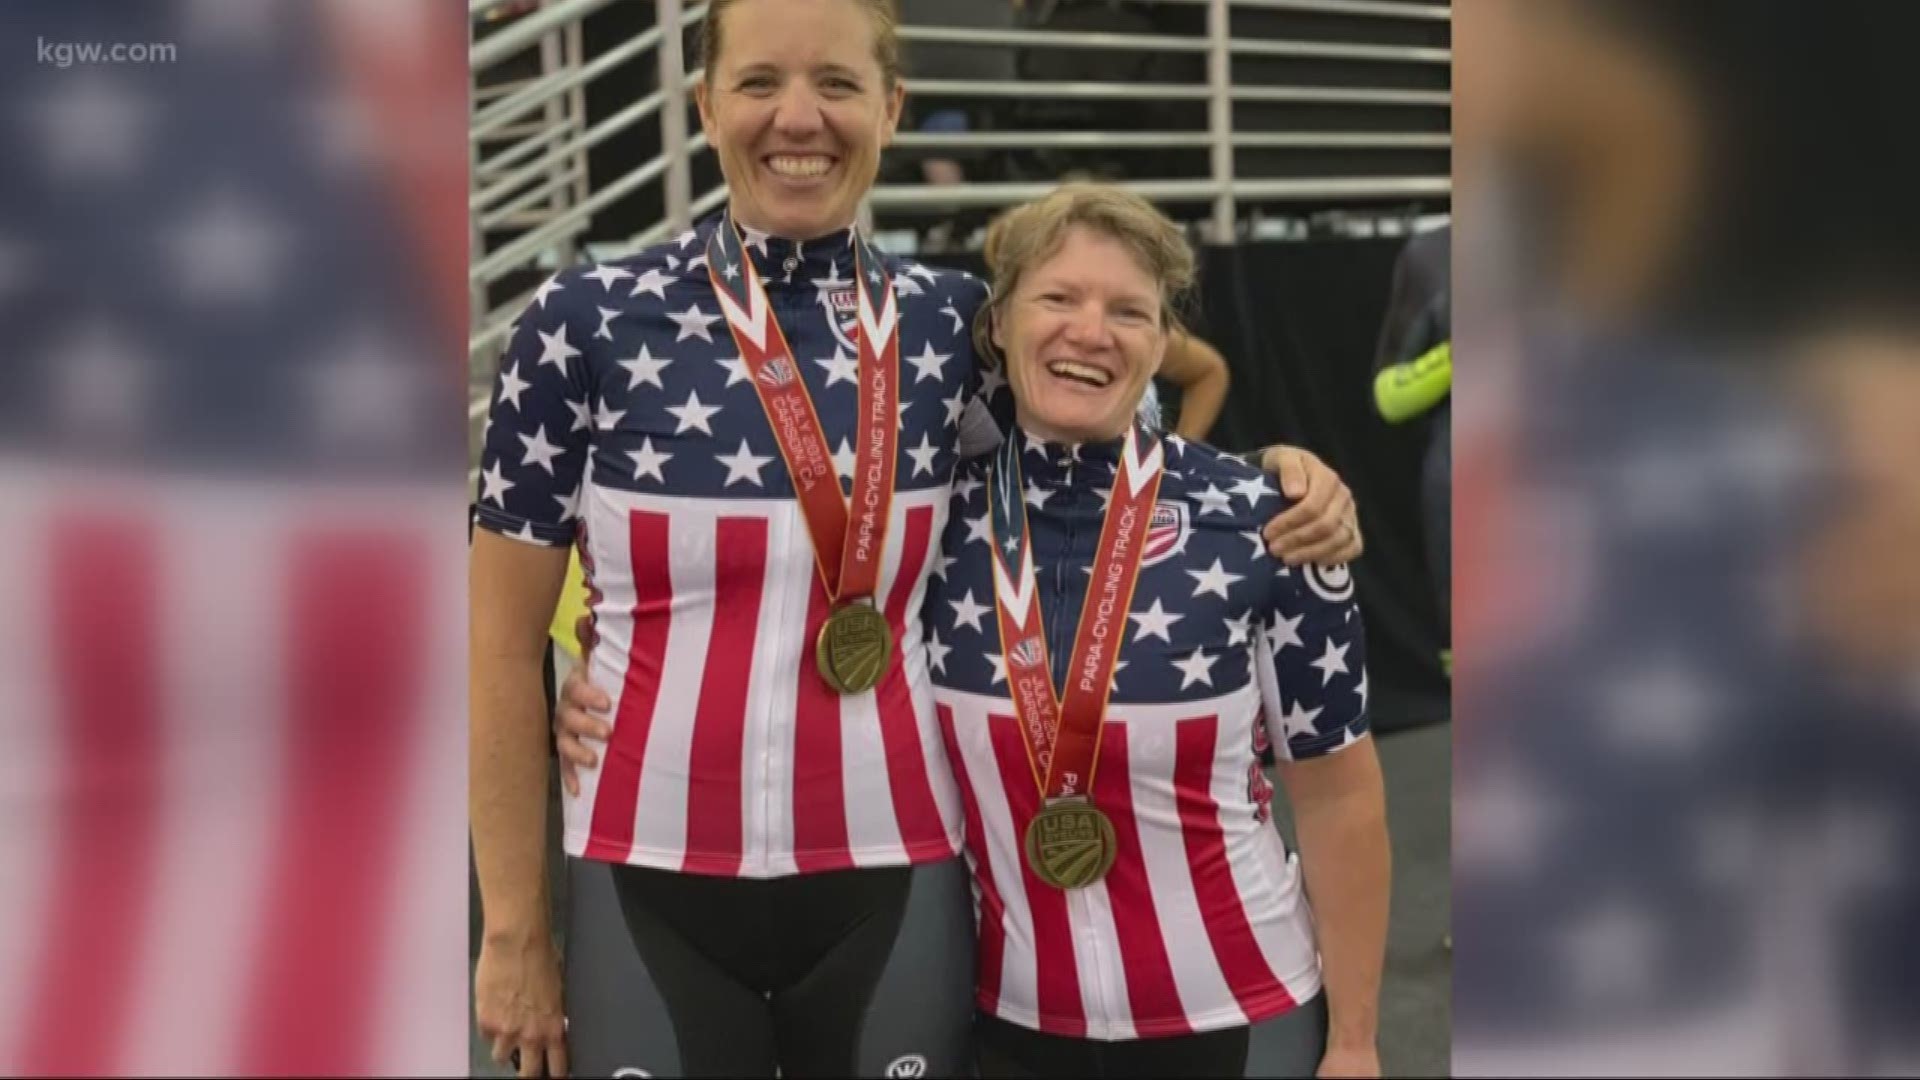 Wendy Wortheizer has a degenerative eye disease called cone rod dystrophy. She now is part of the Blind Girl Cycling Team in the Rogue Valley.